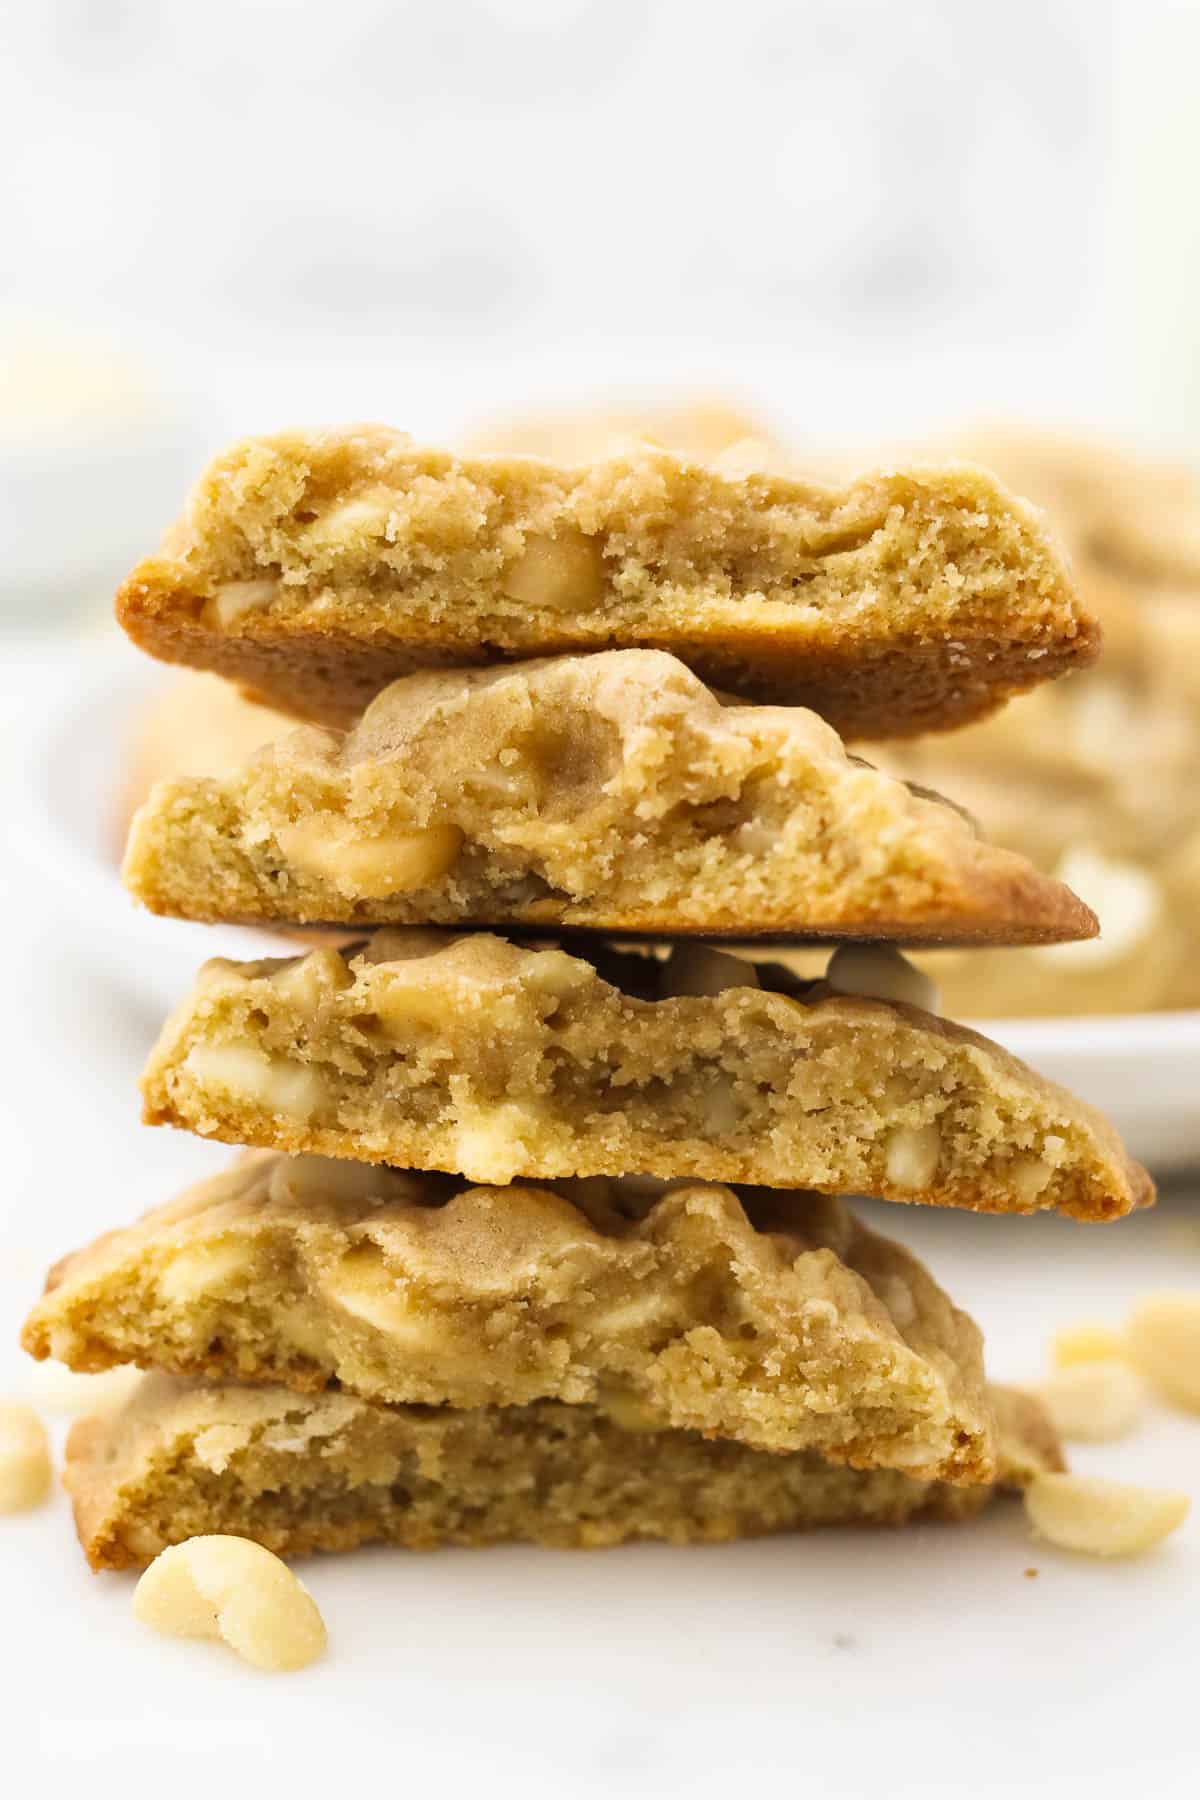 Five Chewy Macadamia Nut Cookies That Have Been Broken in Half and Stacked